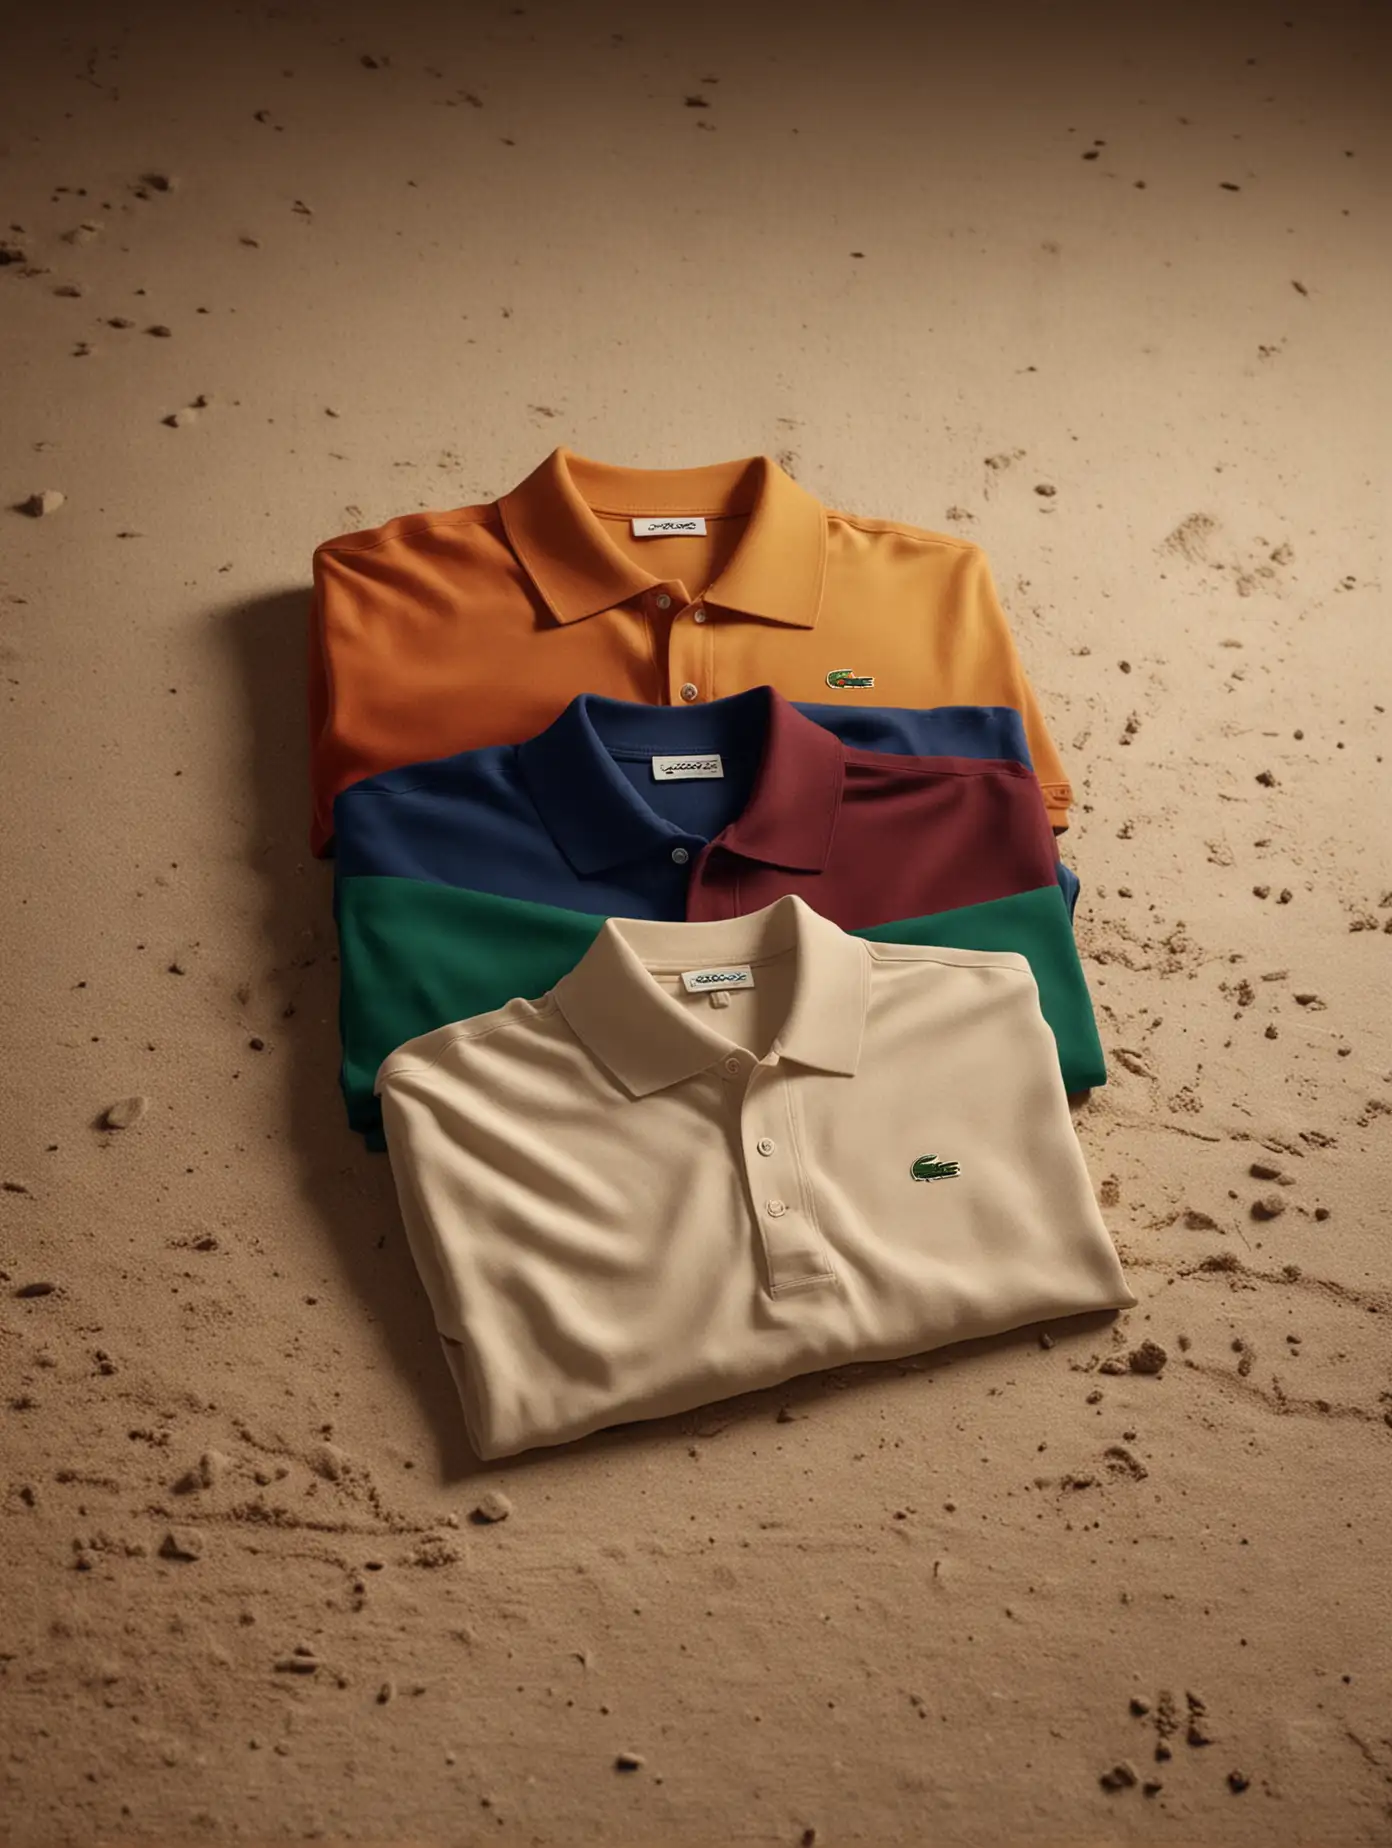 Lacoste Polo Shirts Collection Displayed in Cinematic Sandy Room with Ultra Realistic Detailing